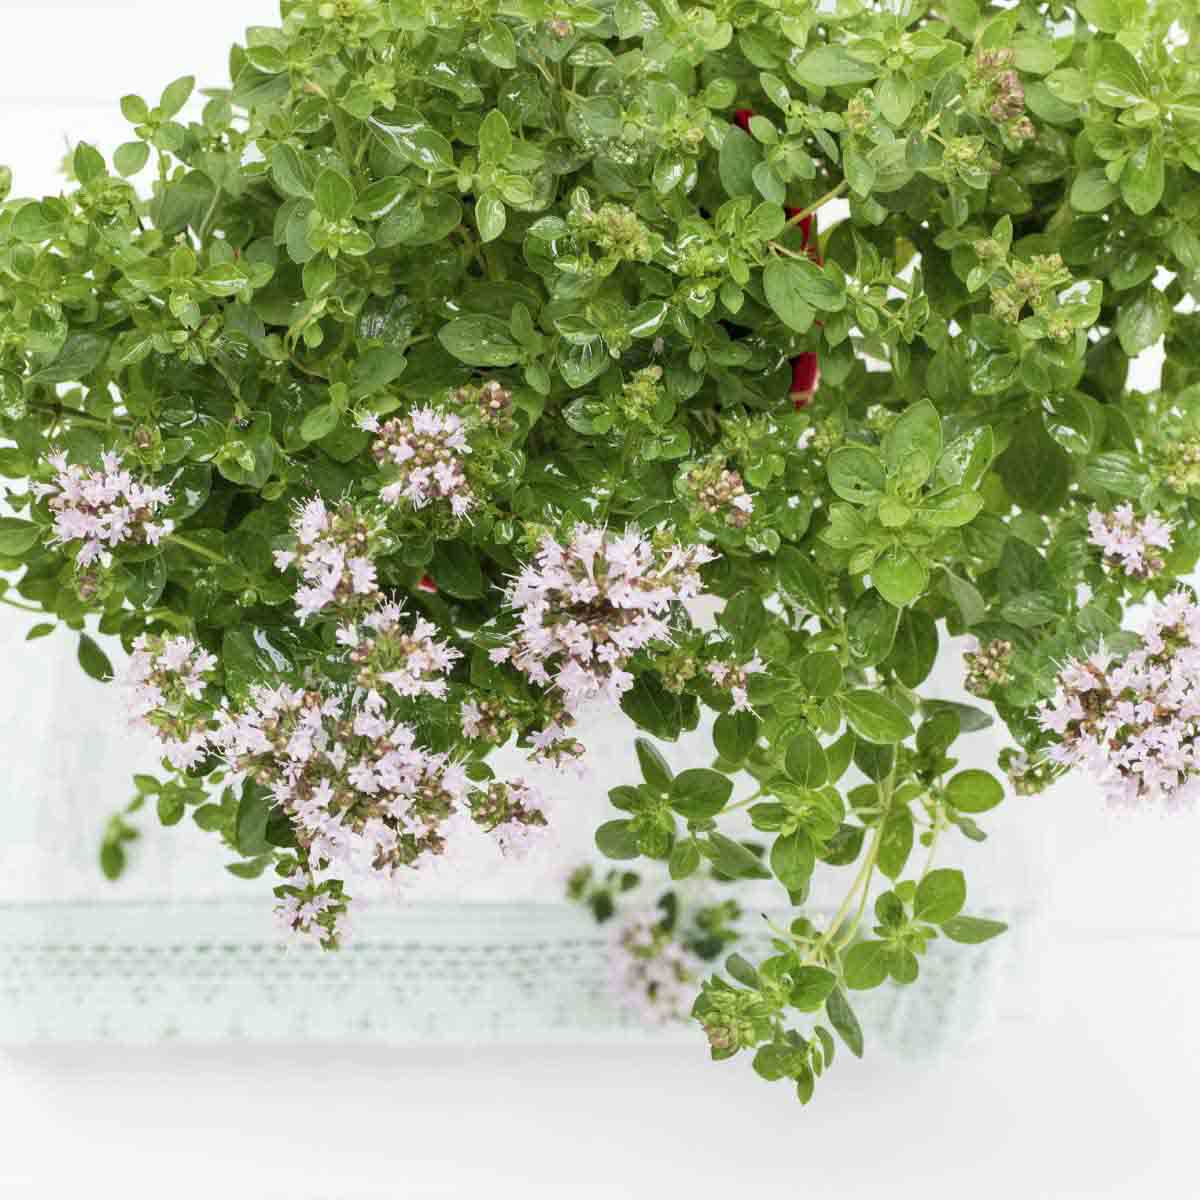 tiny pink flowers all over marjoram plant.